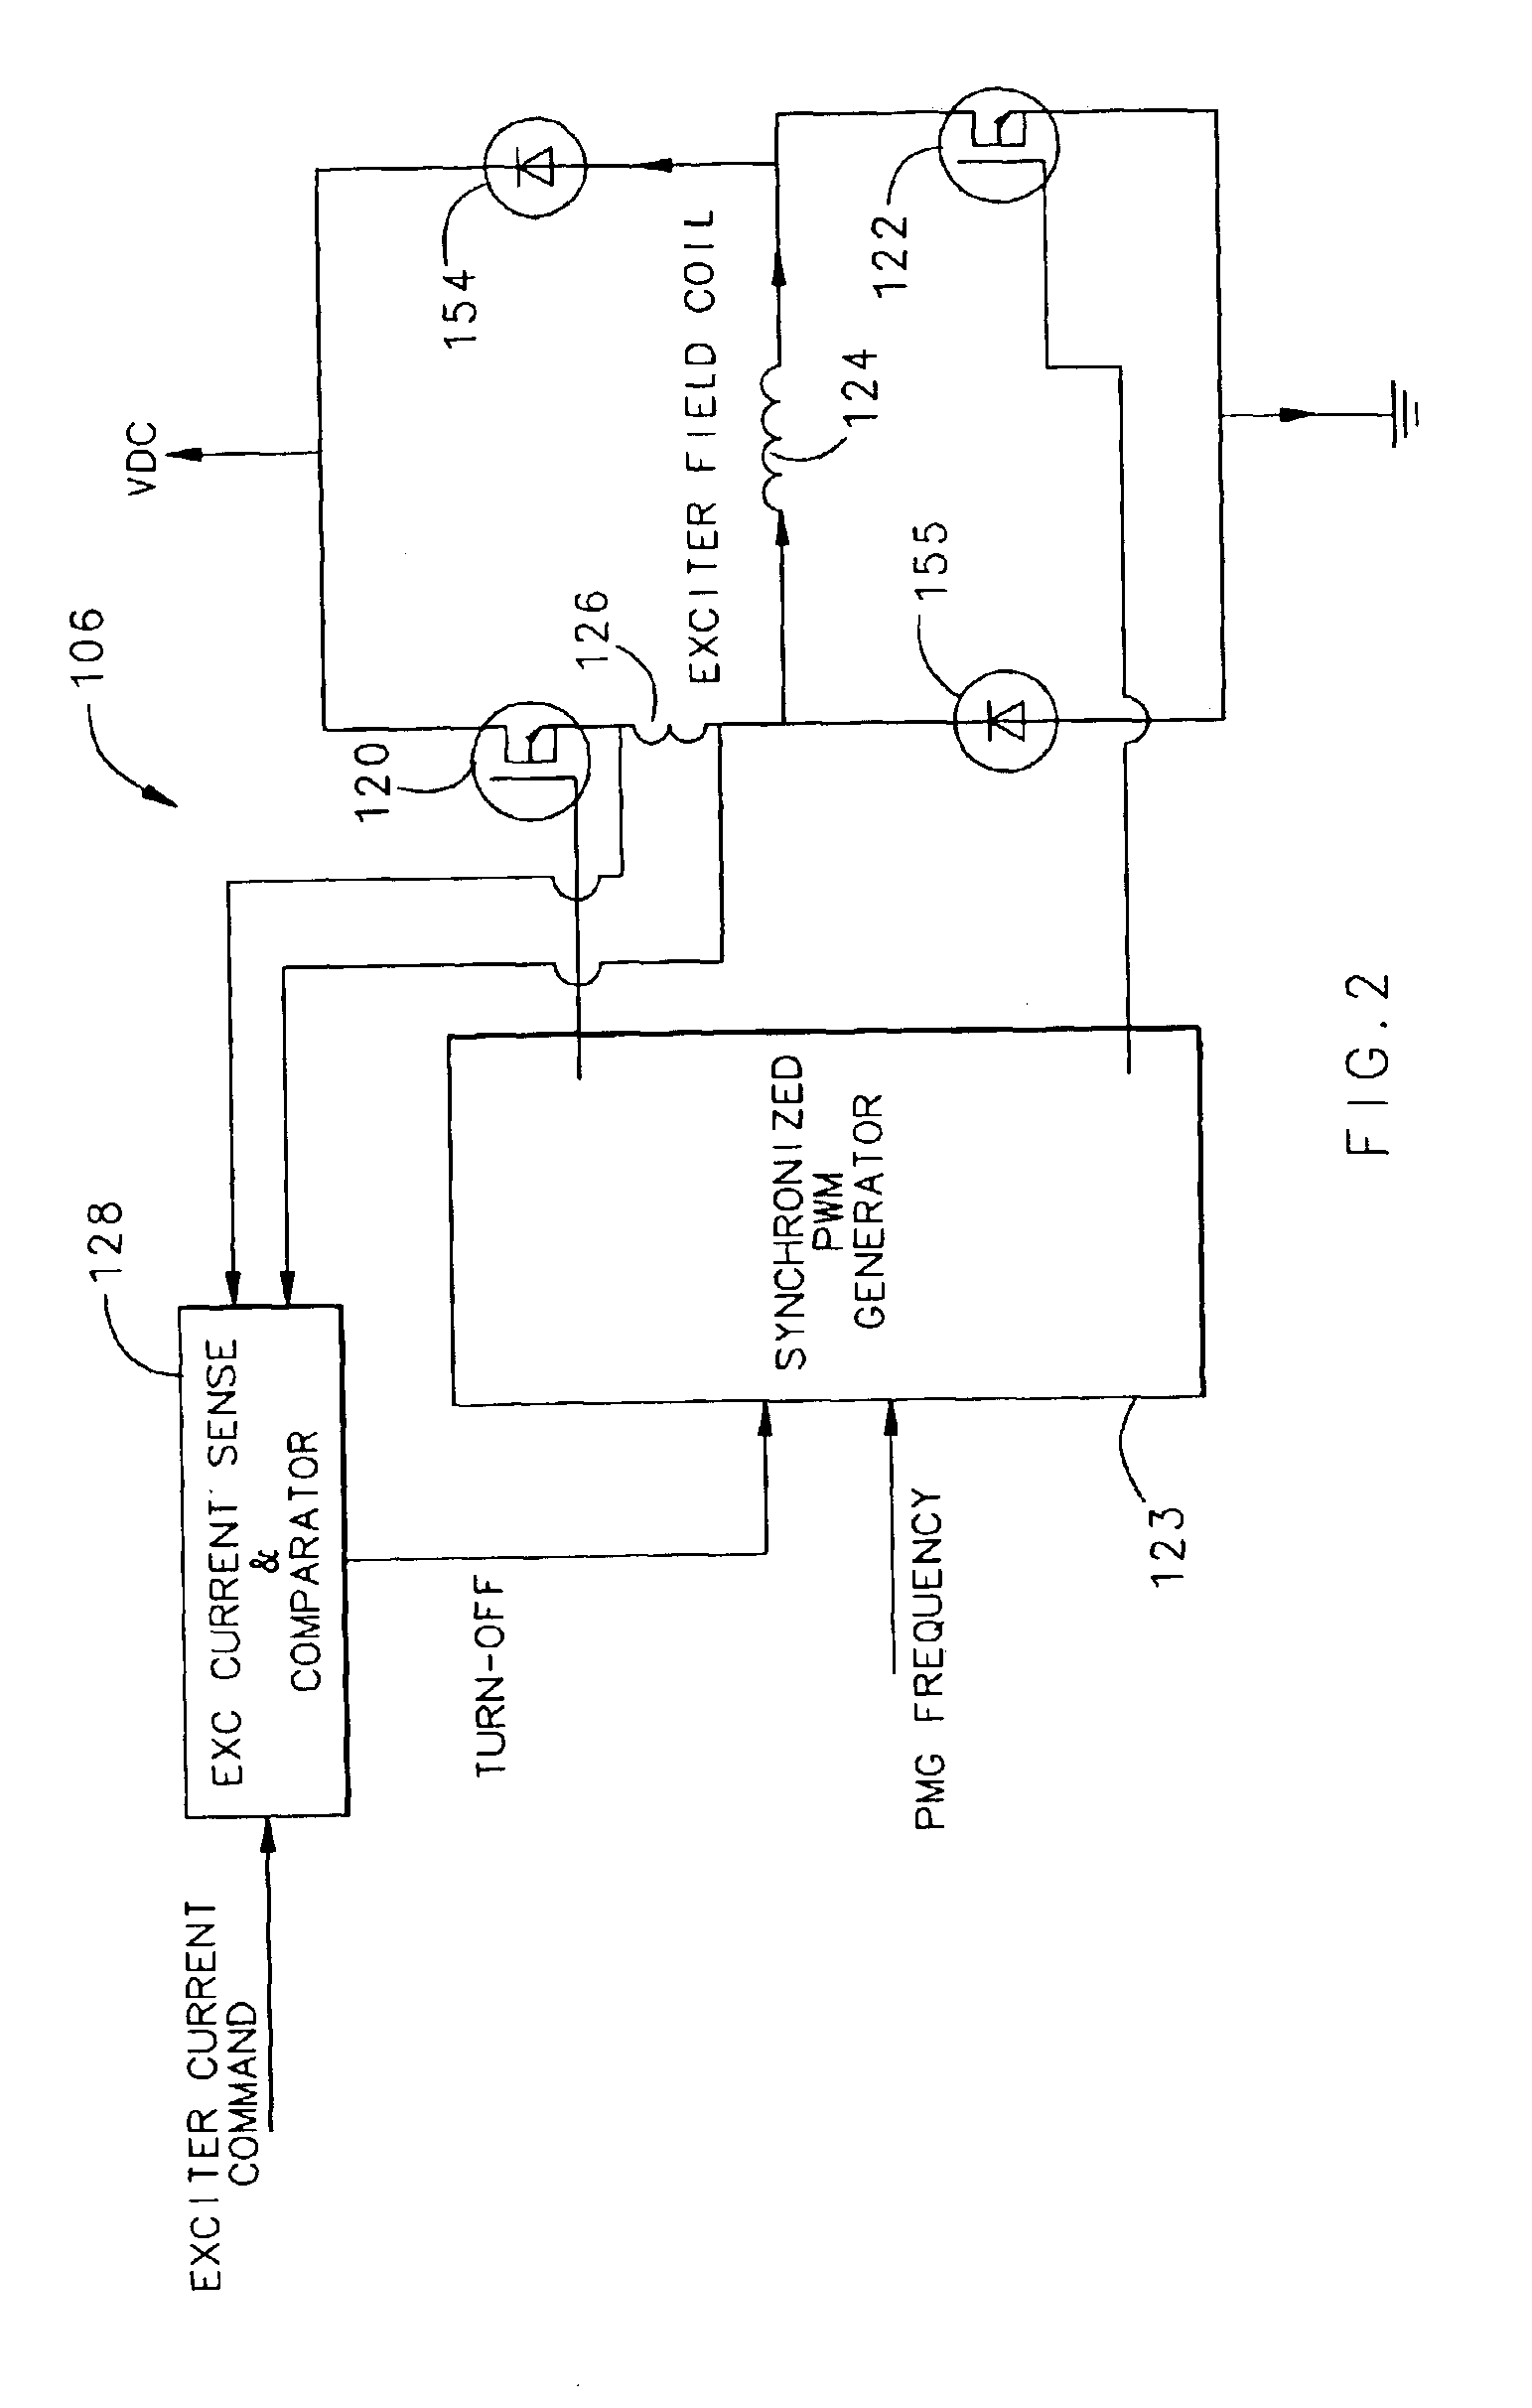 Excessive voltage protector for a variable frequency generating system